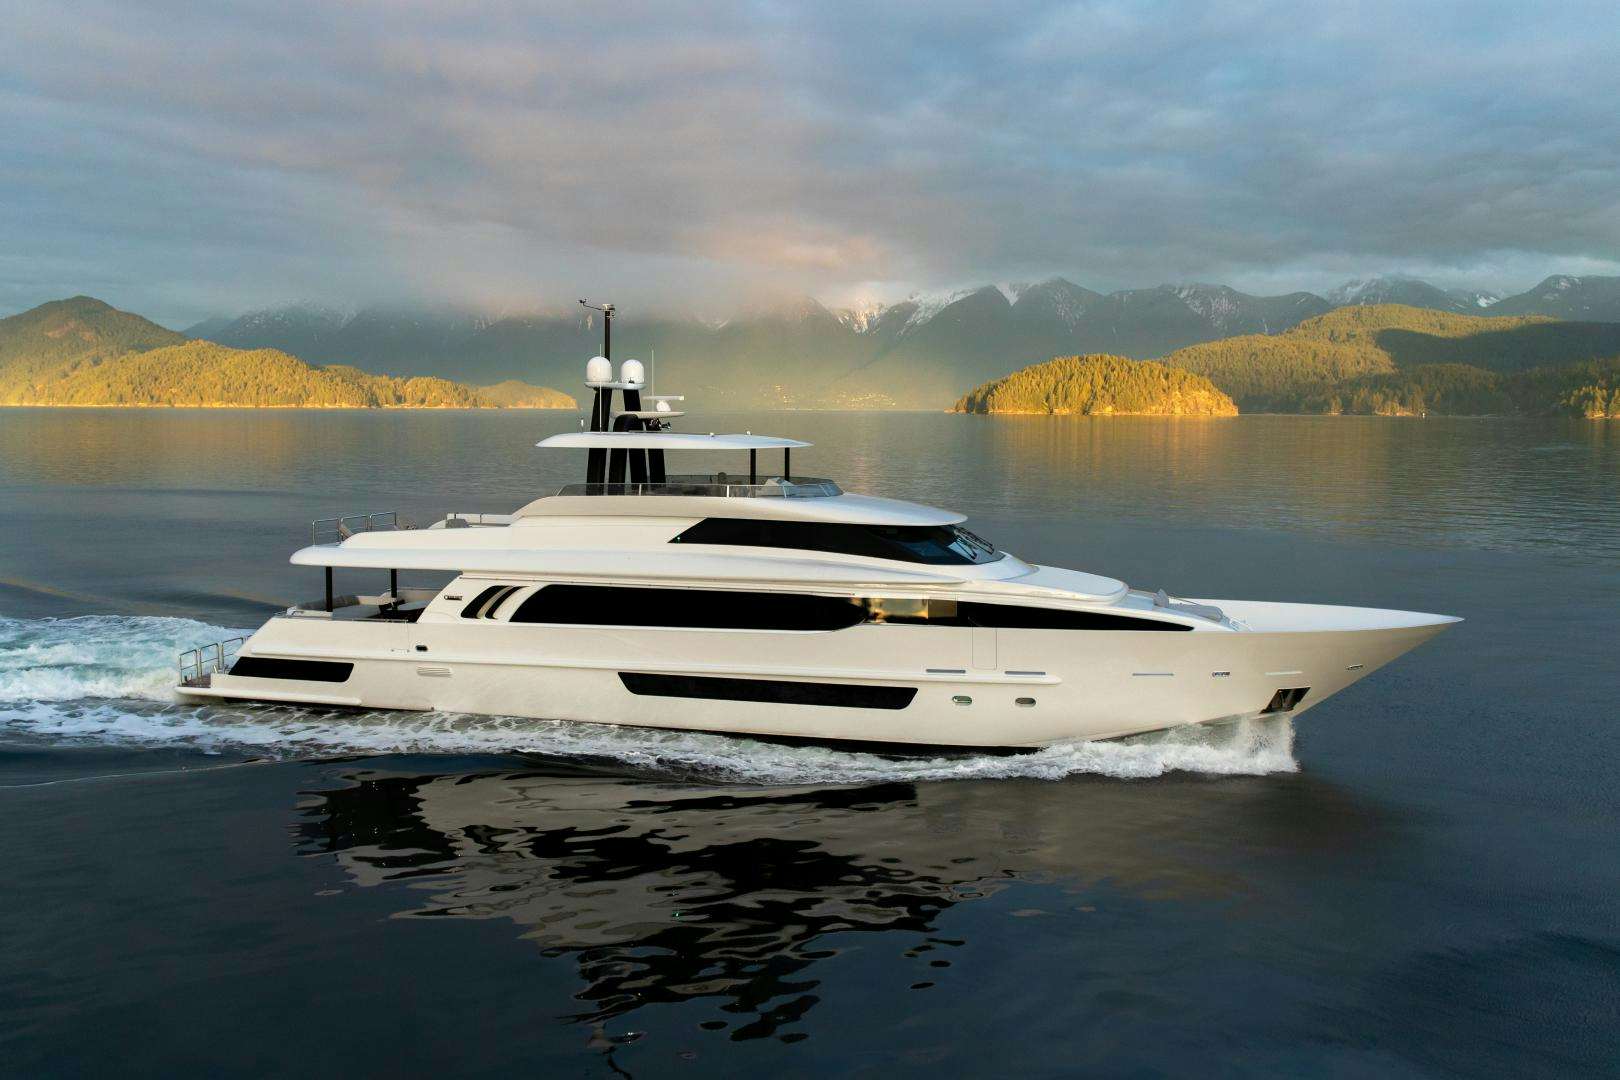 Watch Video for CRESCENT 117 Yacht for Sale